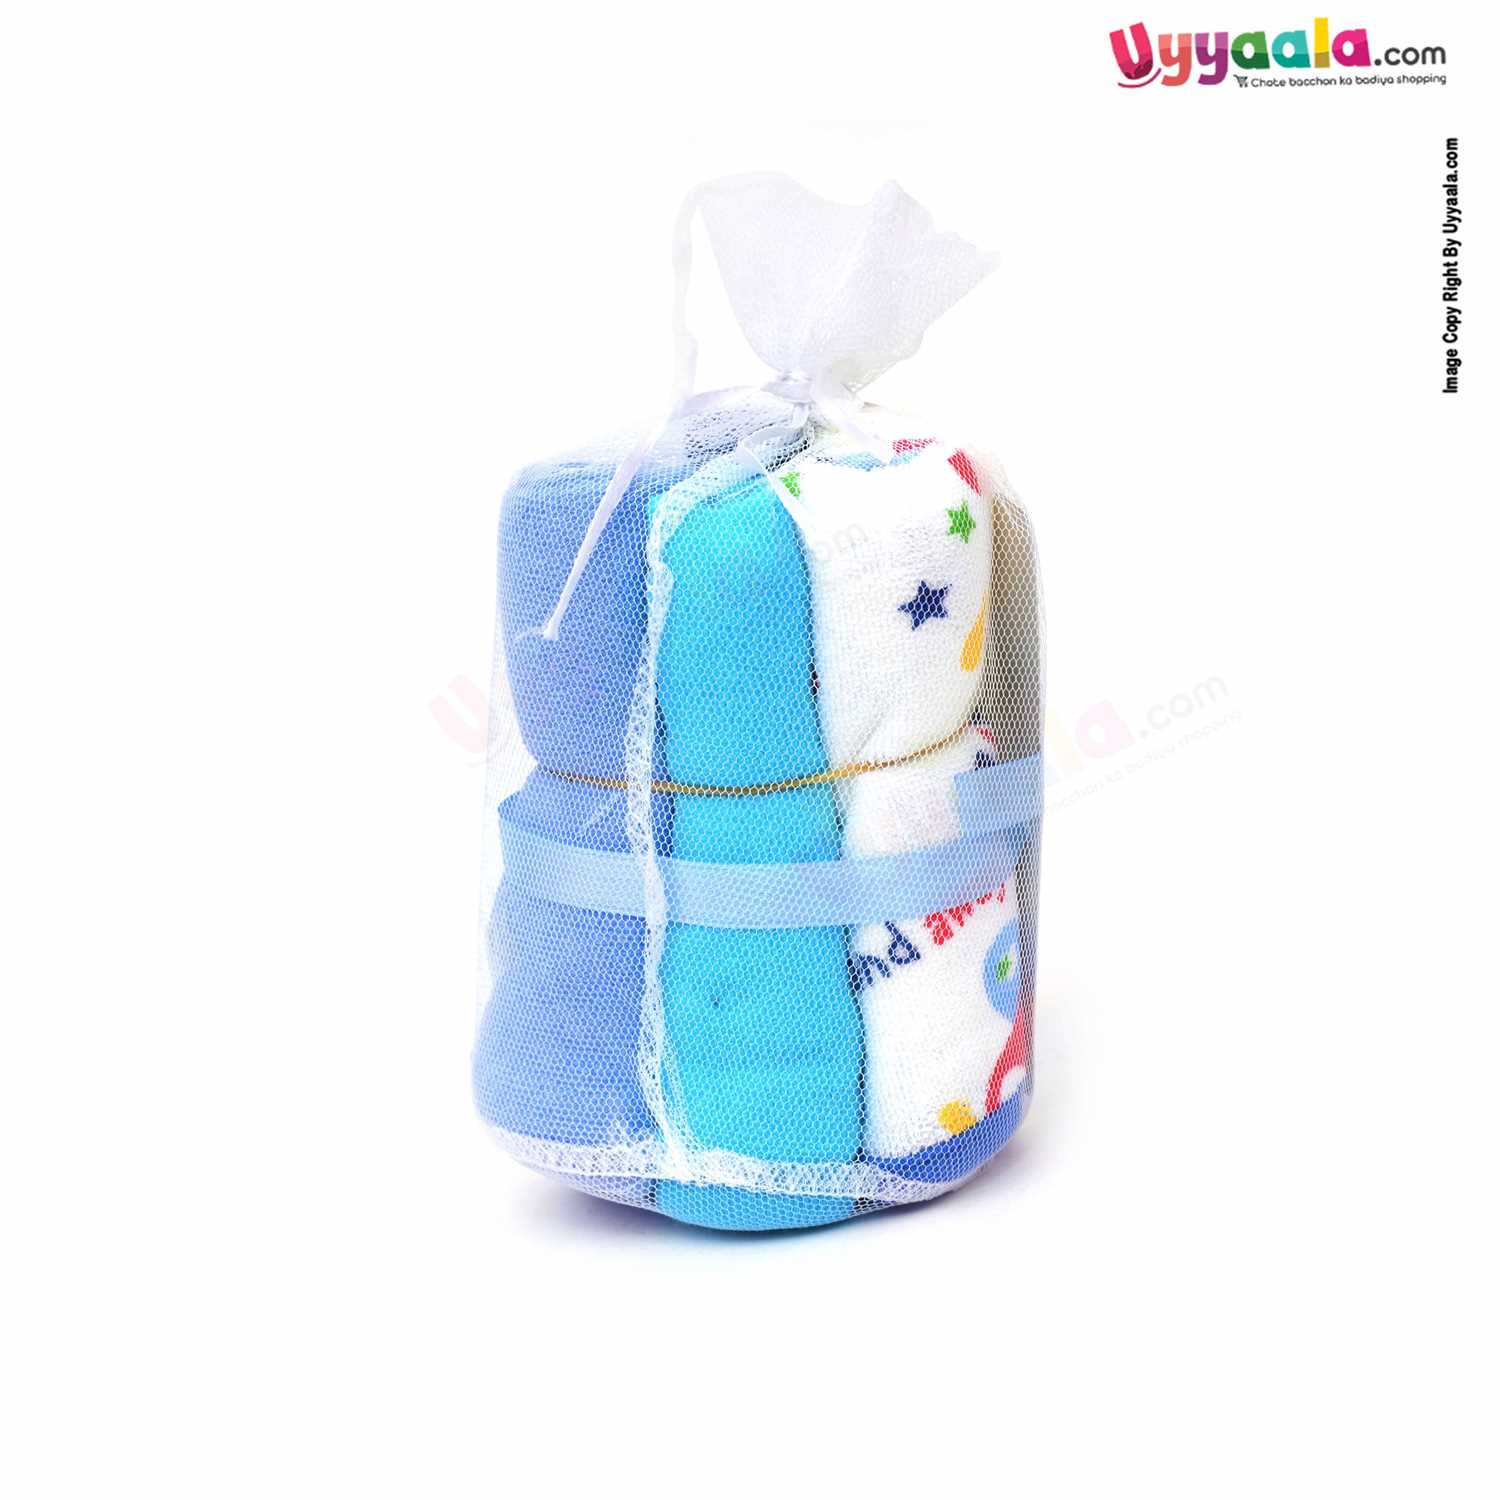 FASHION BABY Napkins (Wash Cloths) For Babies, Pack of 6 with Assorted Prints- Size(25*25cm), 0+m, Multicolor